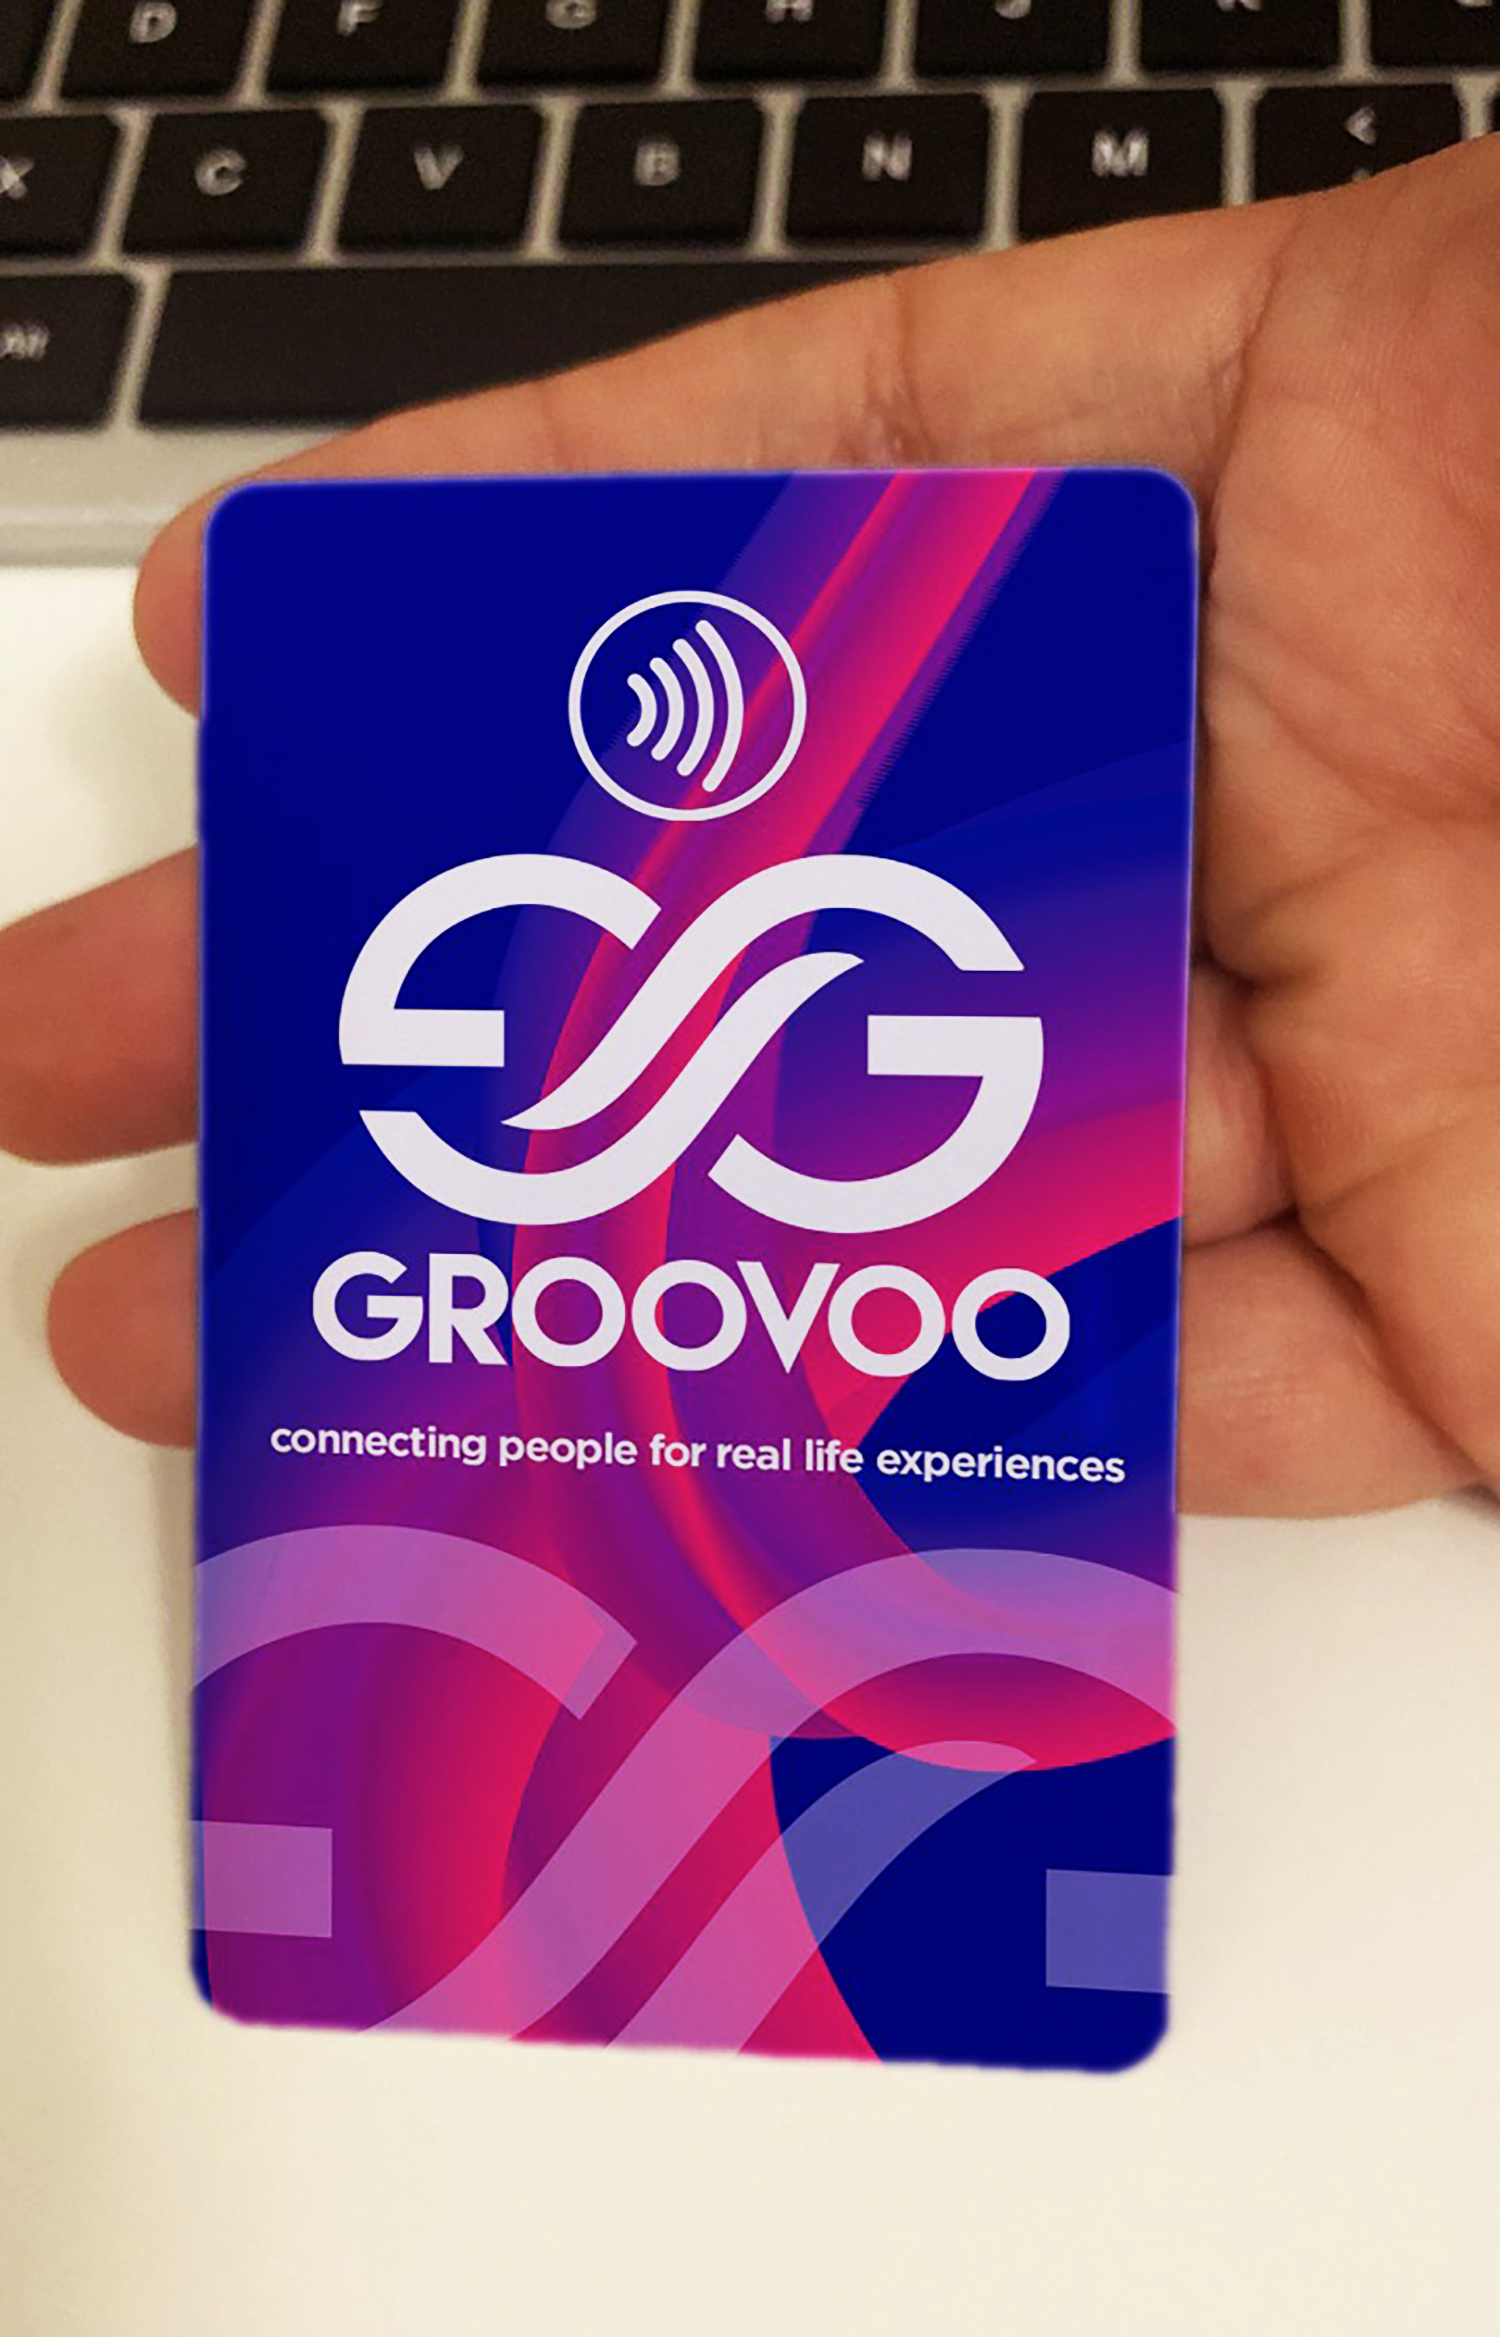 GROOVOO's new near-field communications (NFC) reader is compact and designed to speed up lines of people at event venues with a quick tap of a ticket holder's GROOVOO wallet on their mobile device.